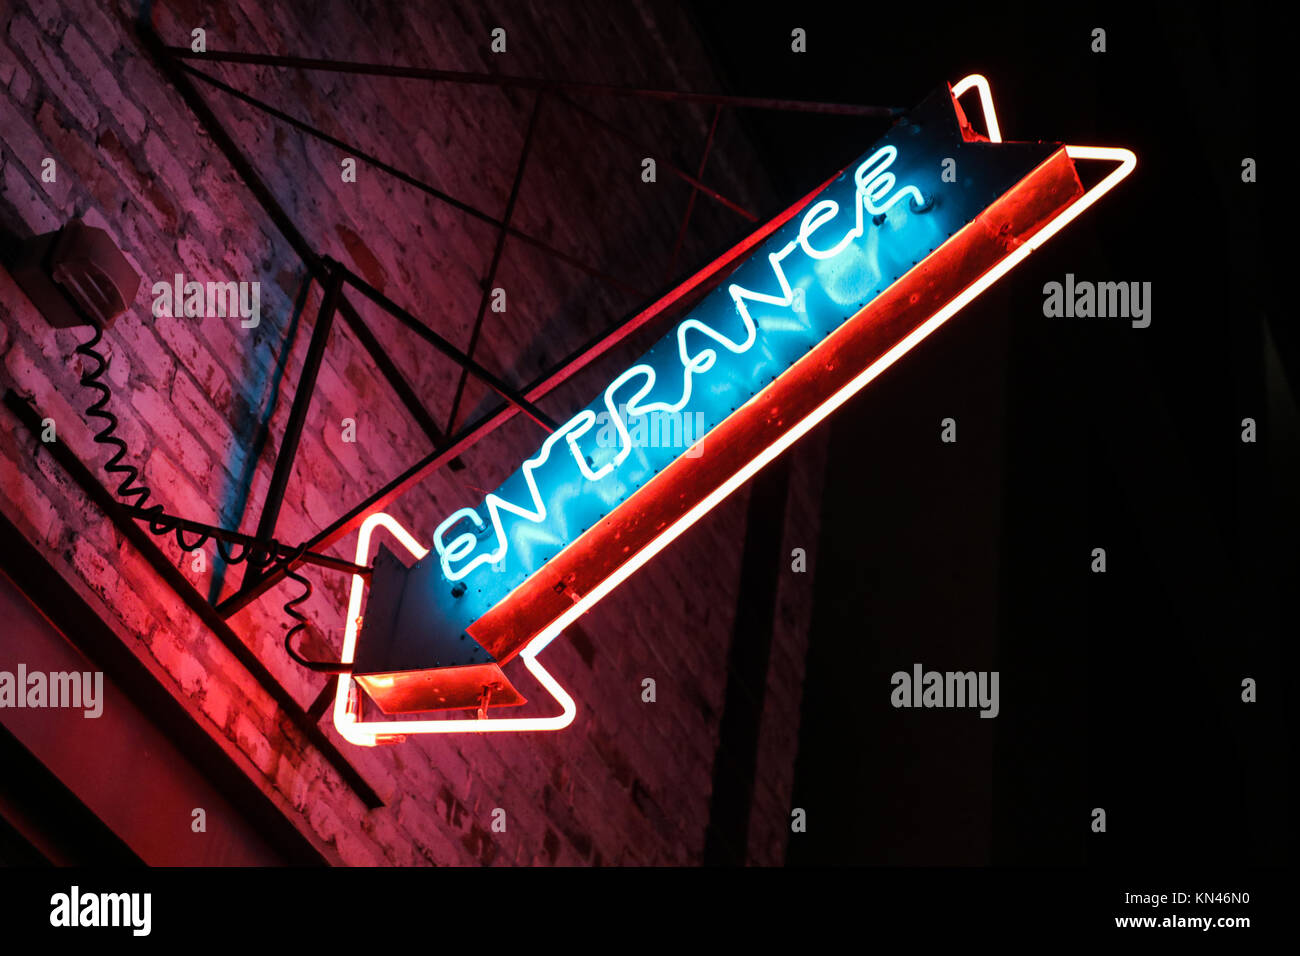 Neon Entrance Sign on Building at Night Stock Photo